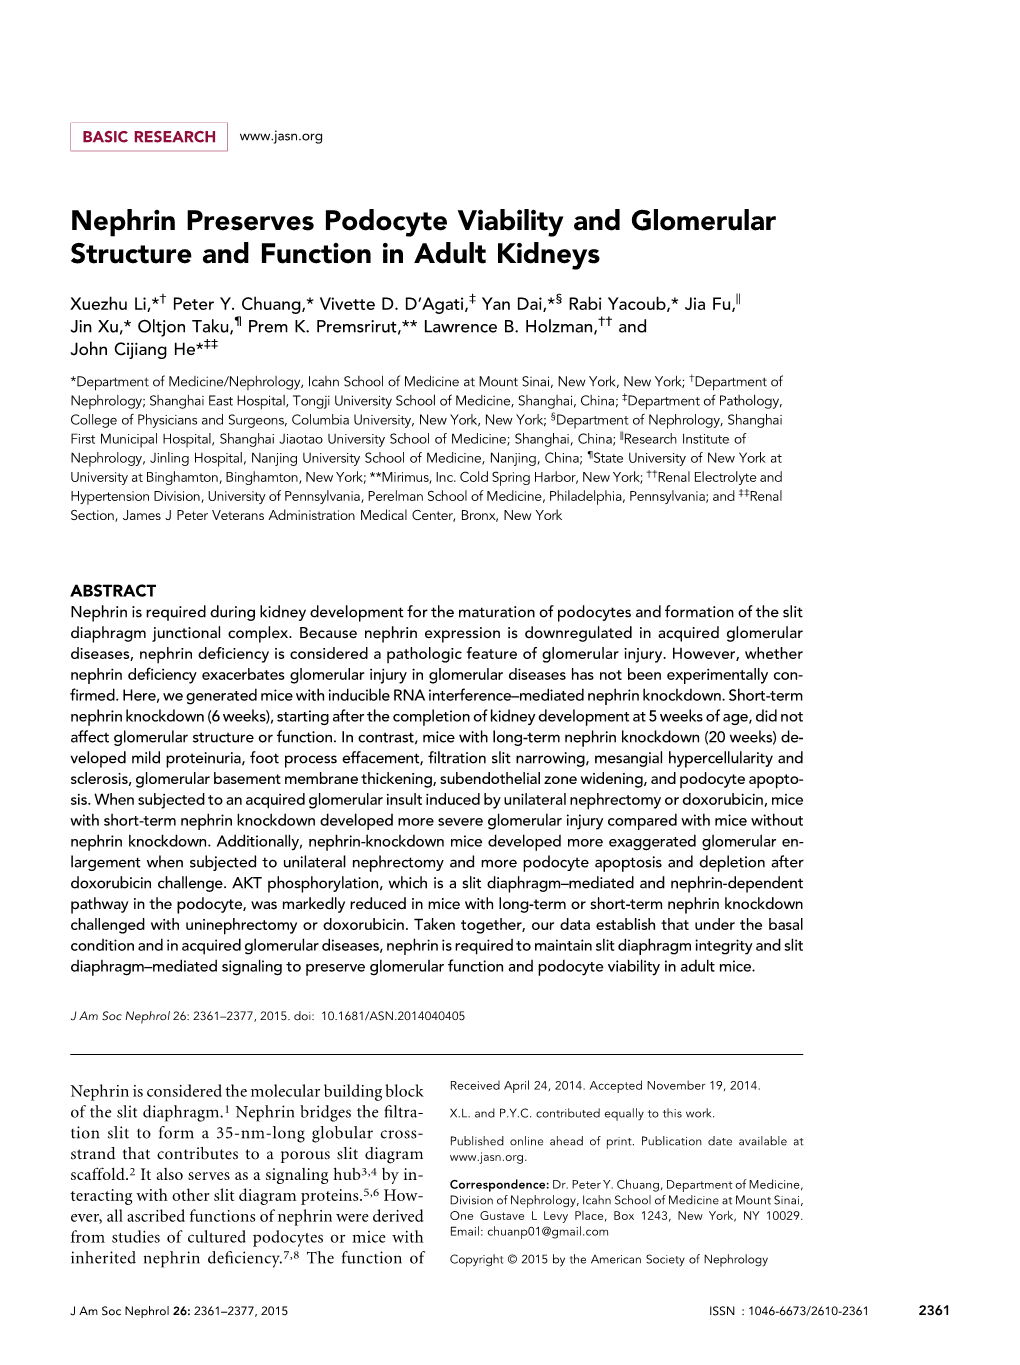 Nephrin Preserves Podocyte Viability and Glomerular Structure and Function in Adult Kidneys